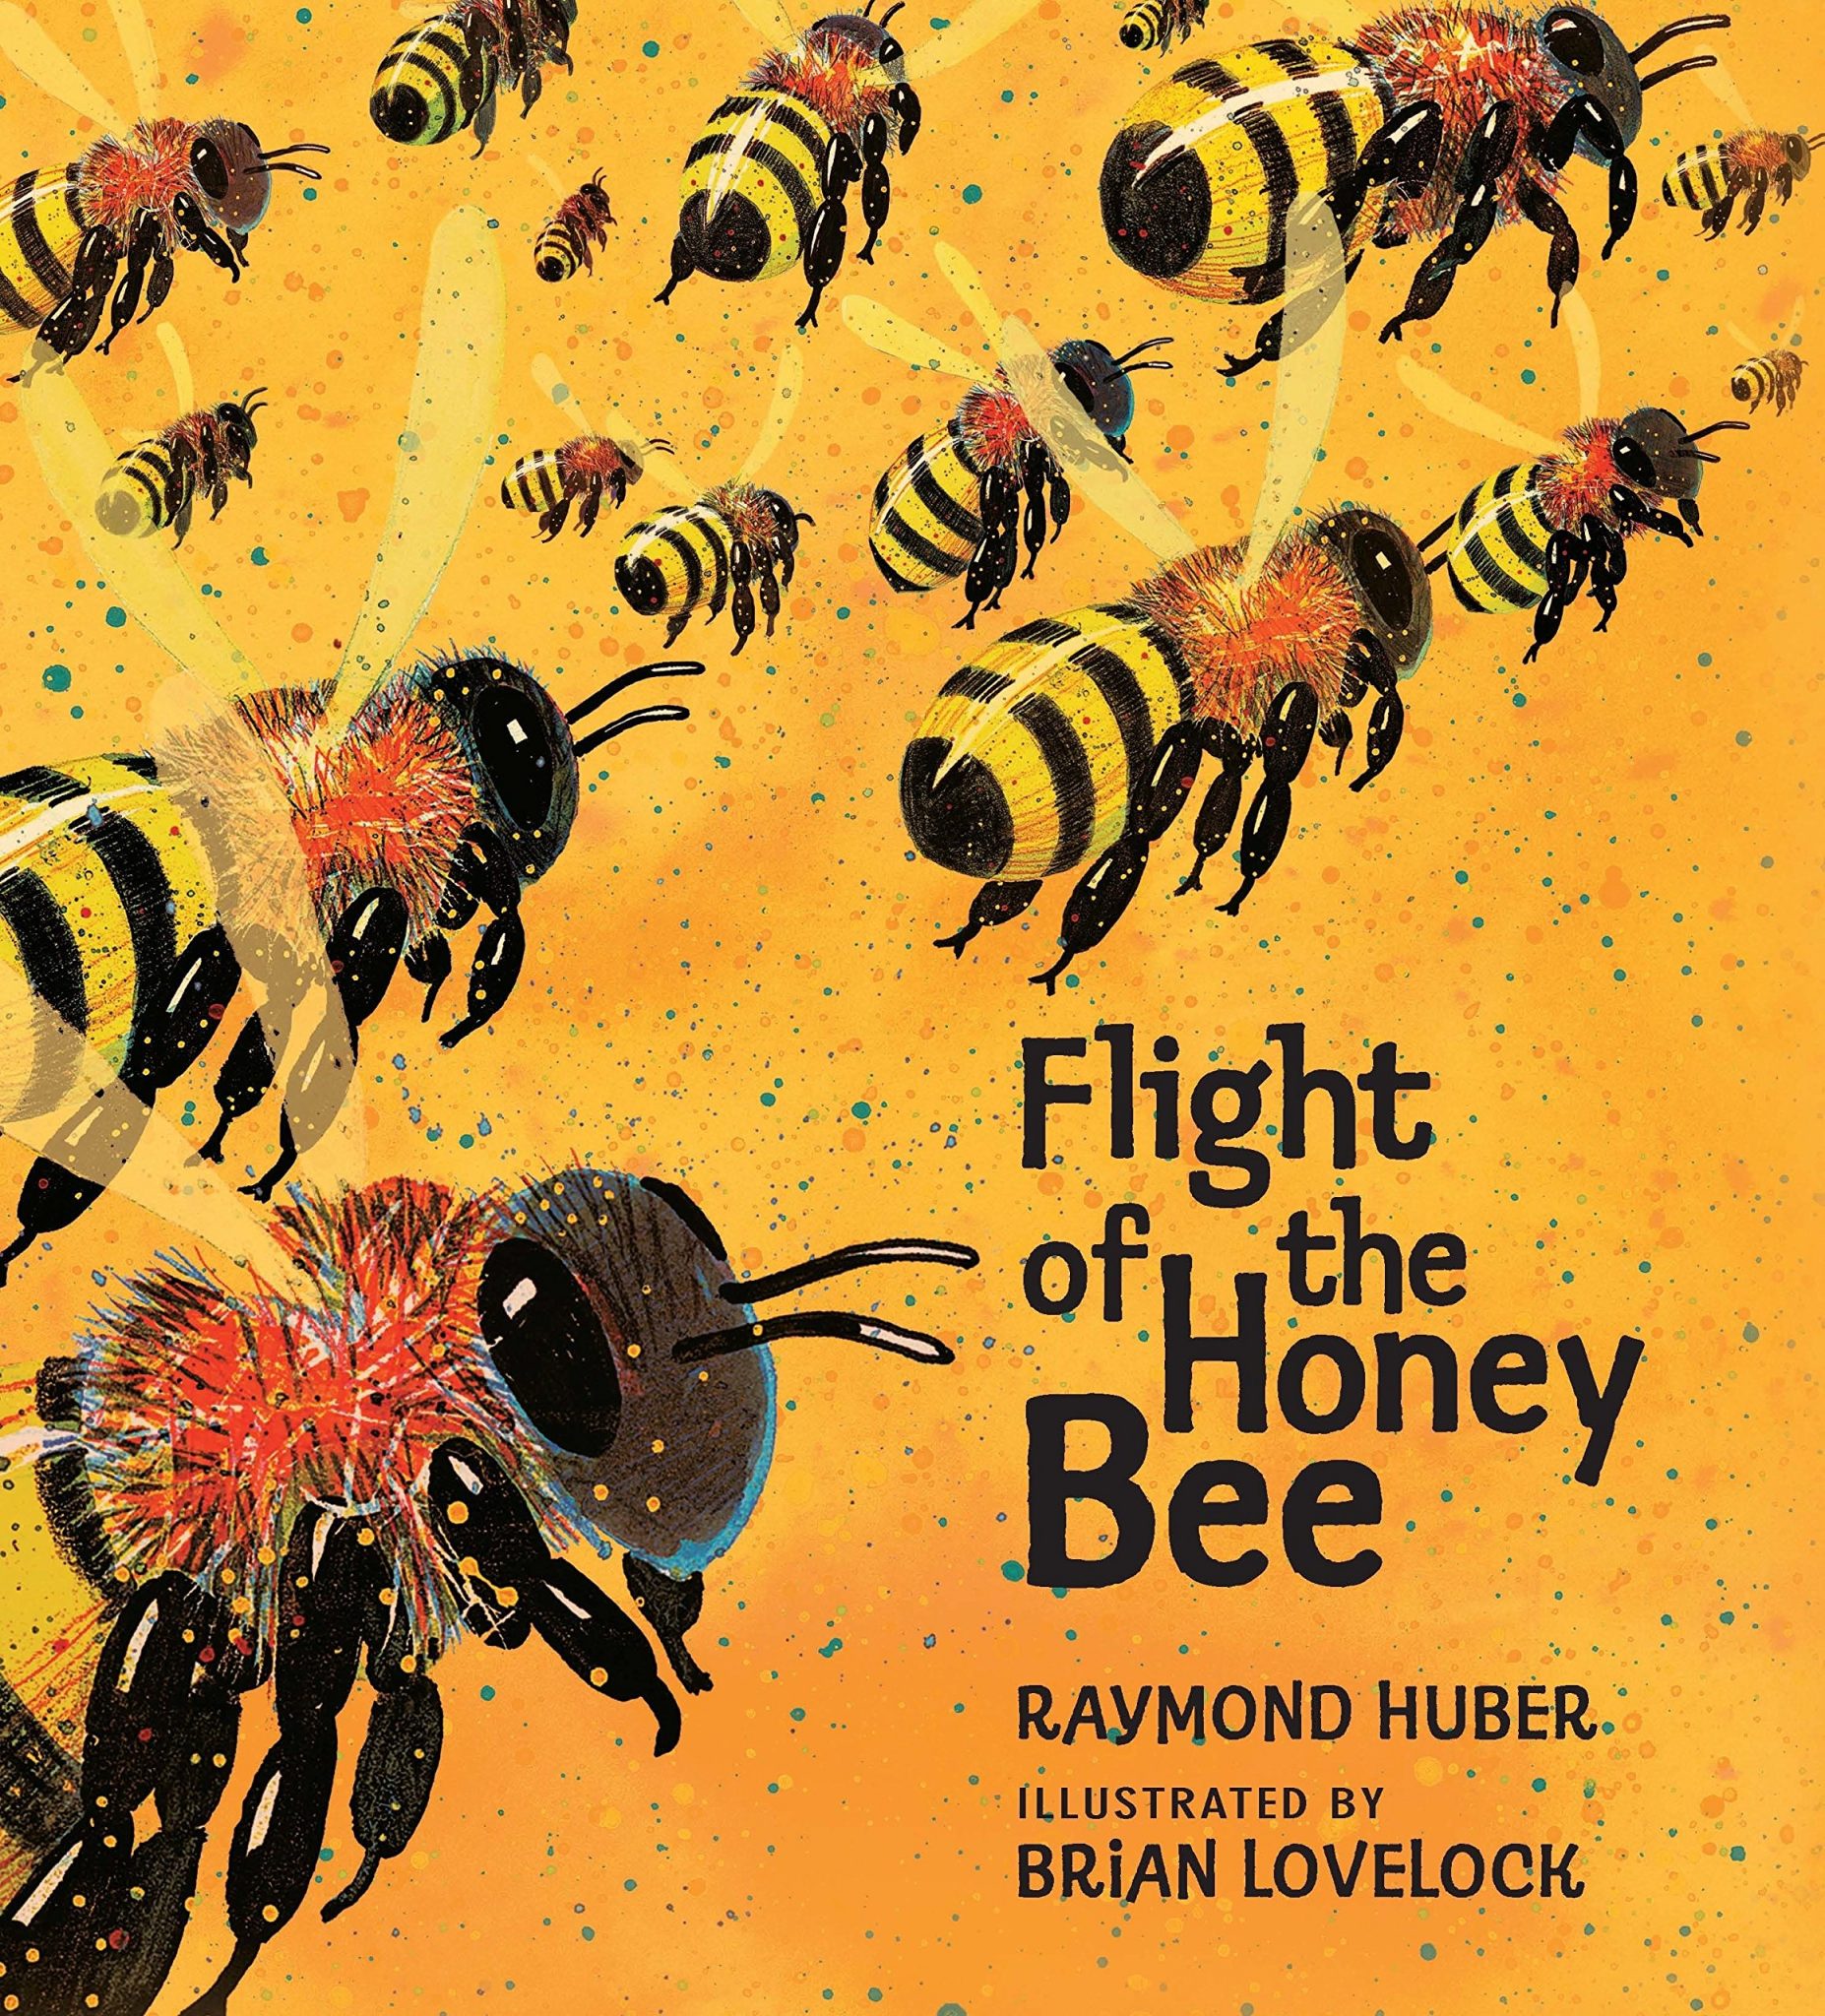 Bee Books for Kids